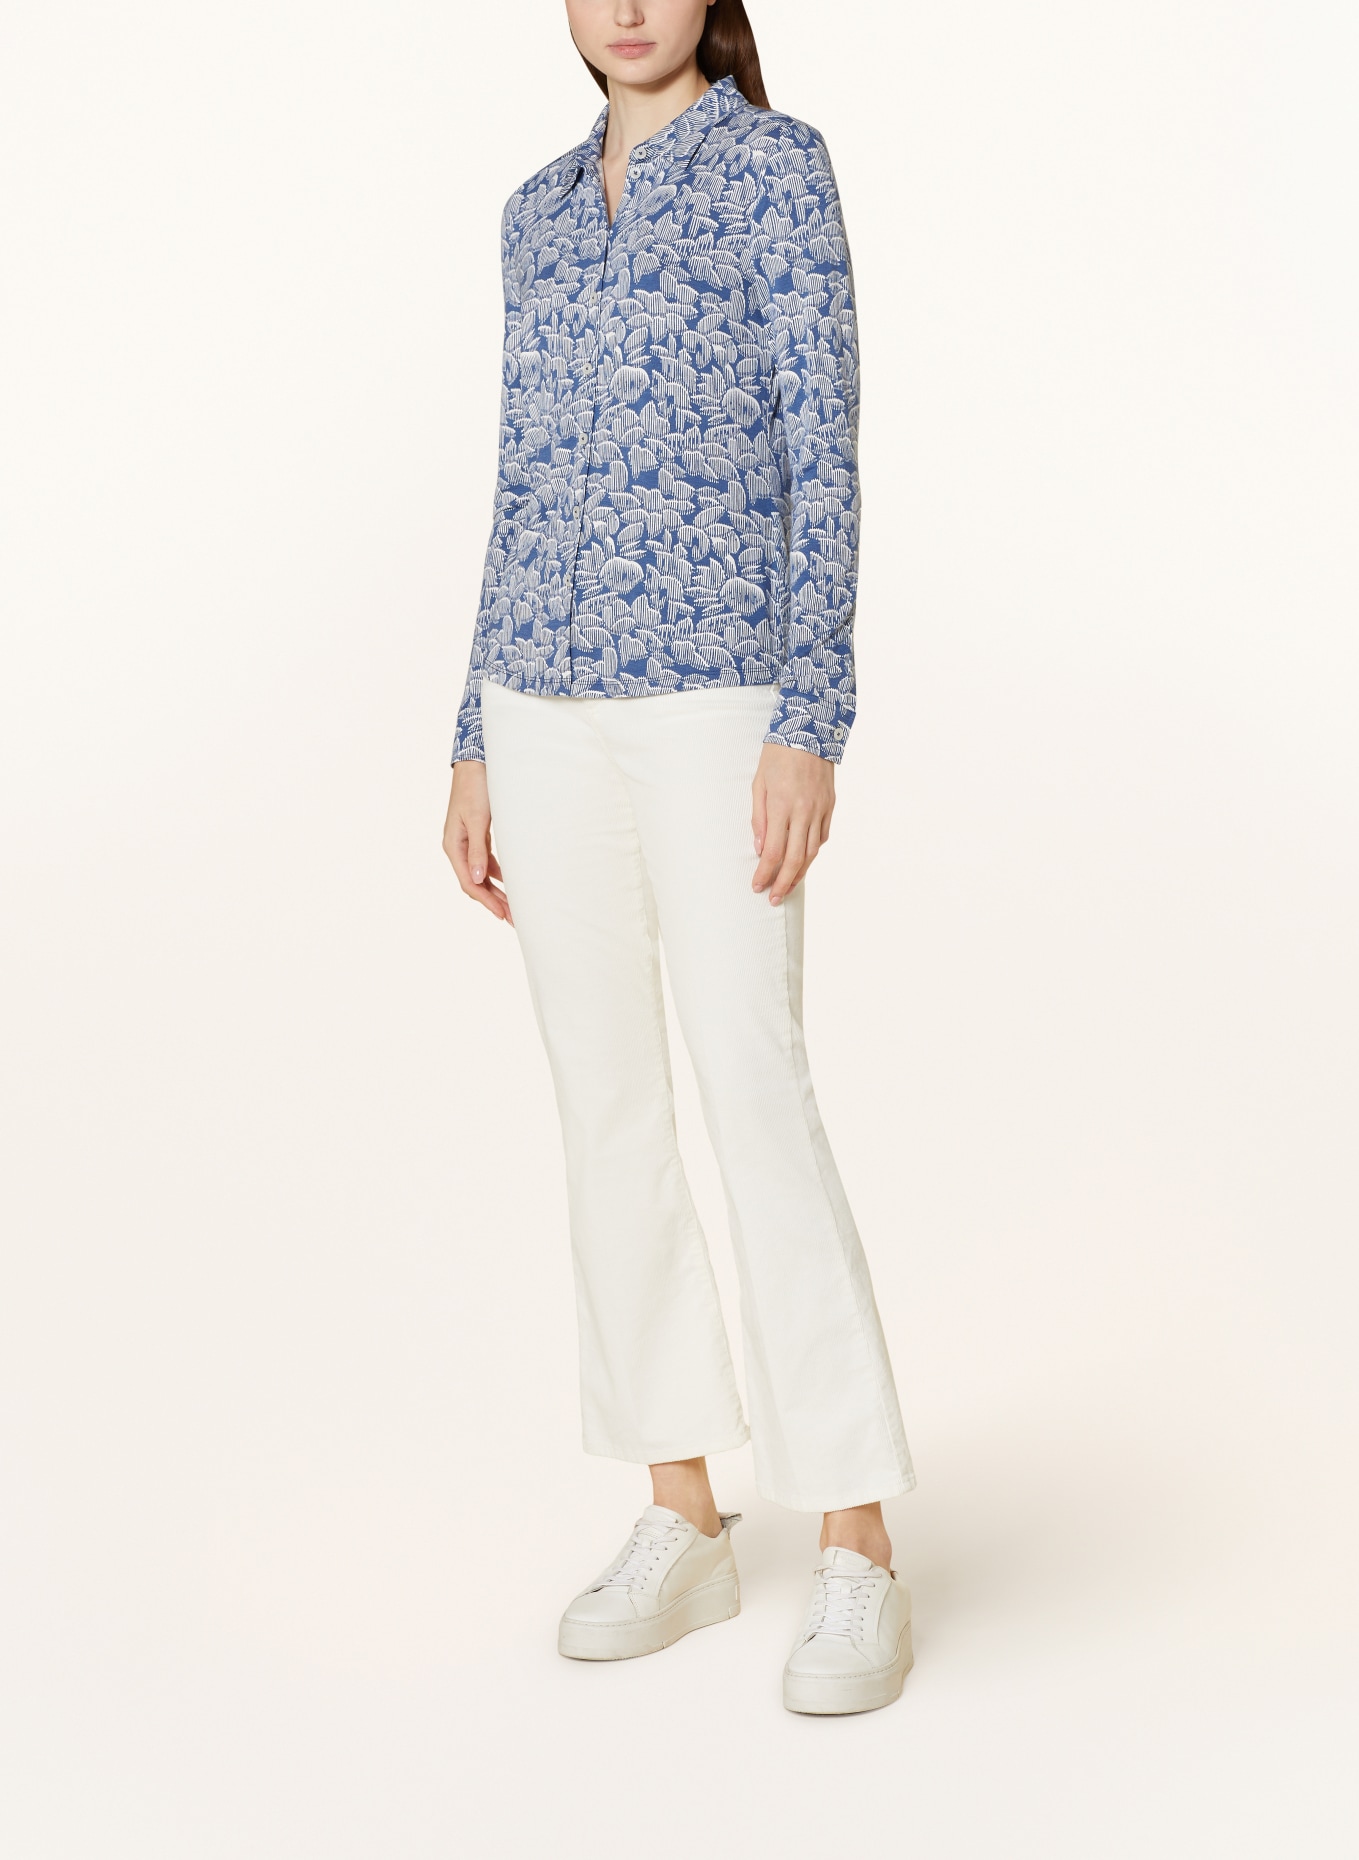 Marc O'Polo Shirt blouse made of jersey, Color: BLUE/ WHITE (Image 2)